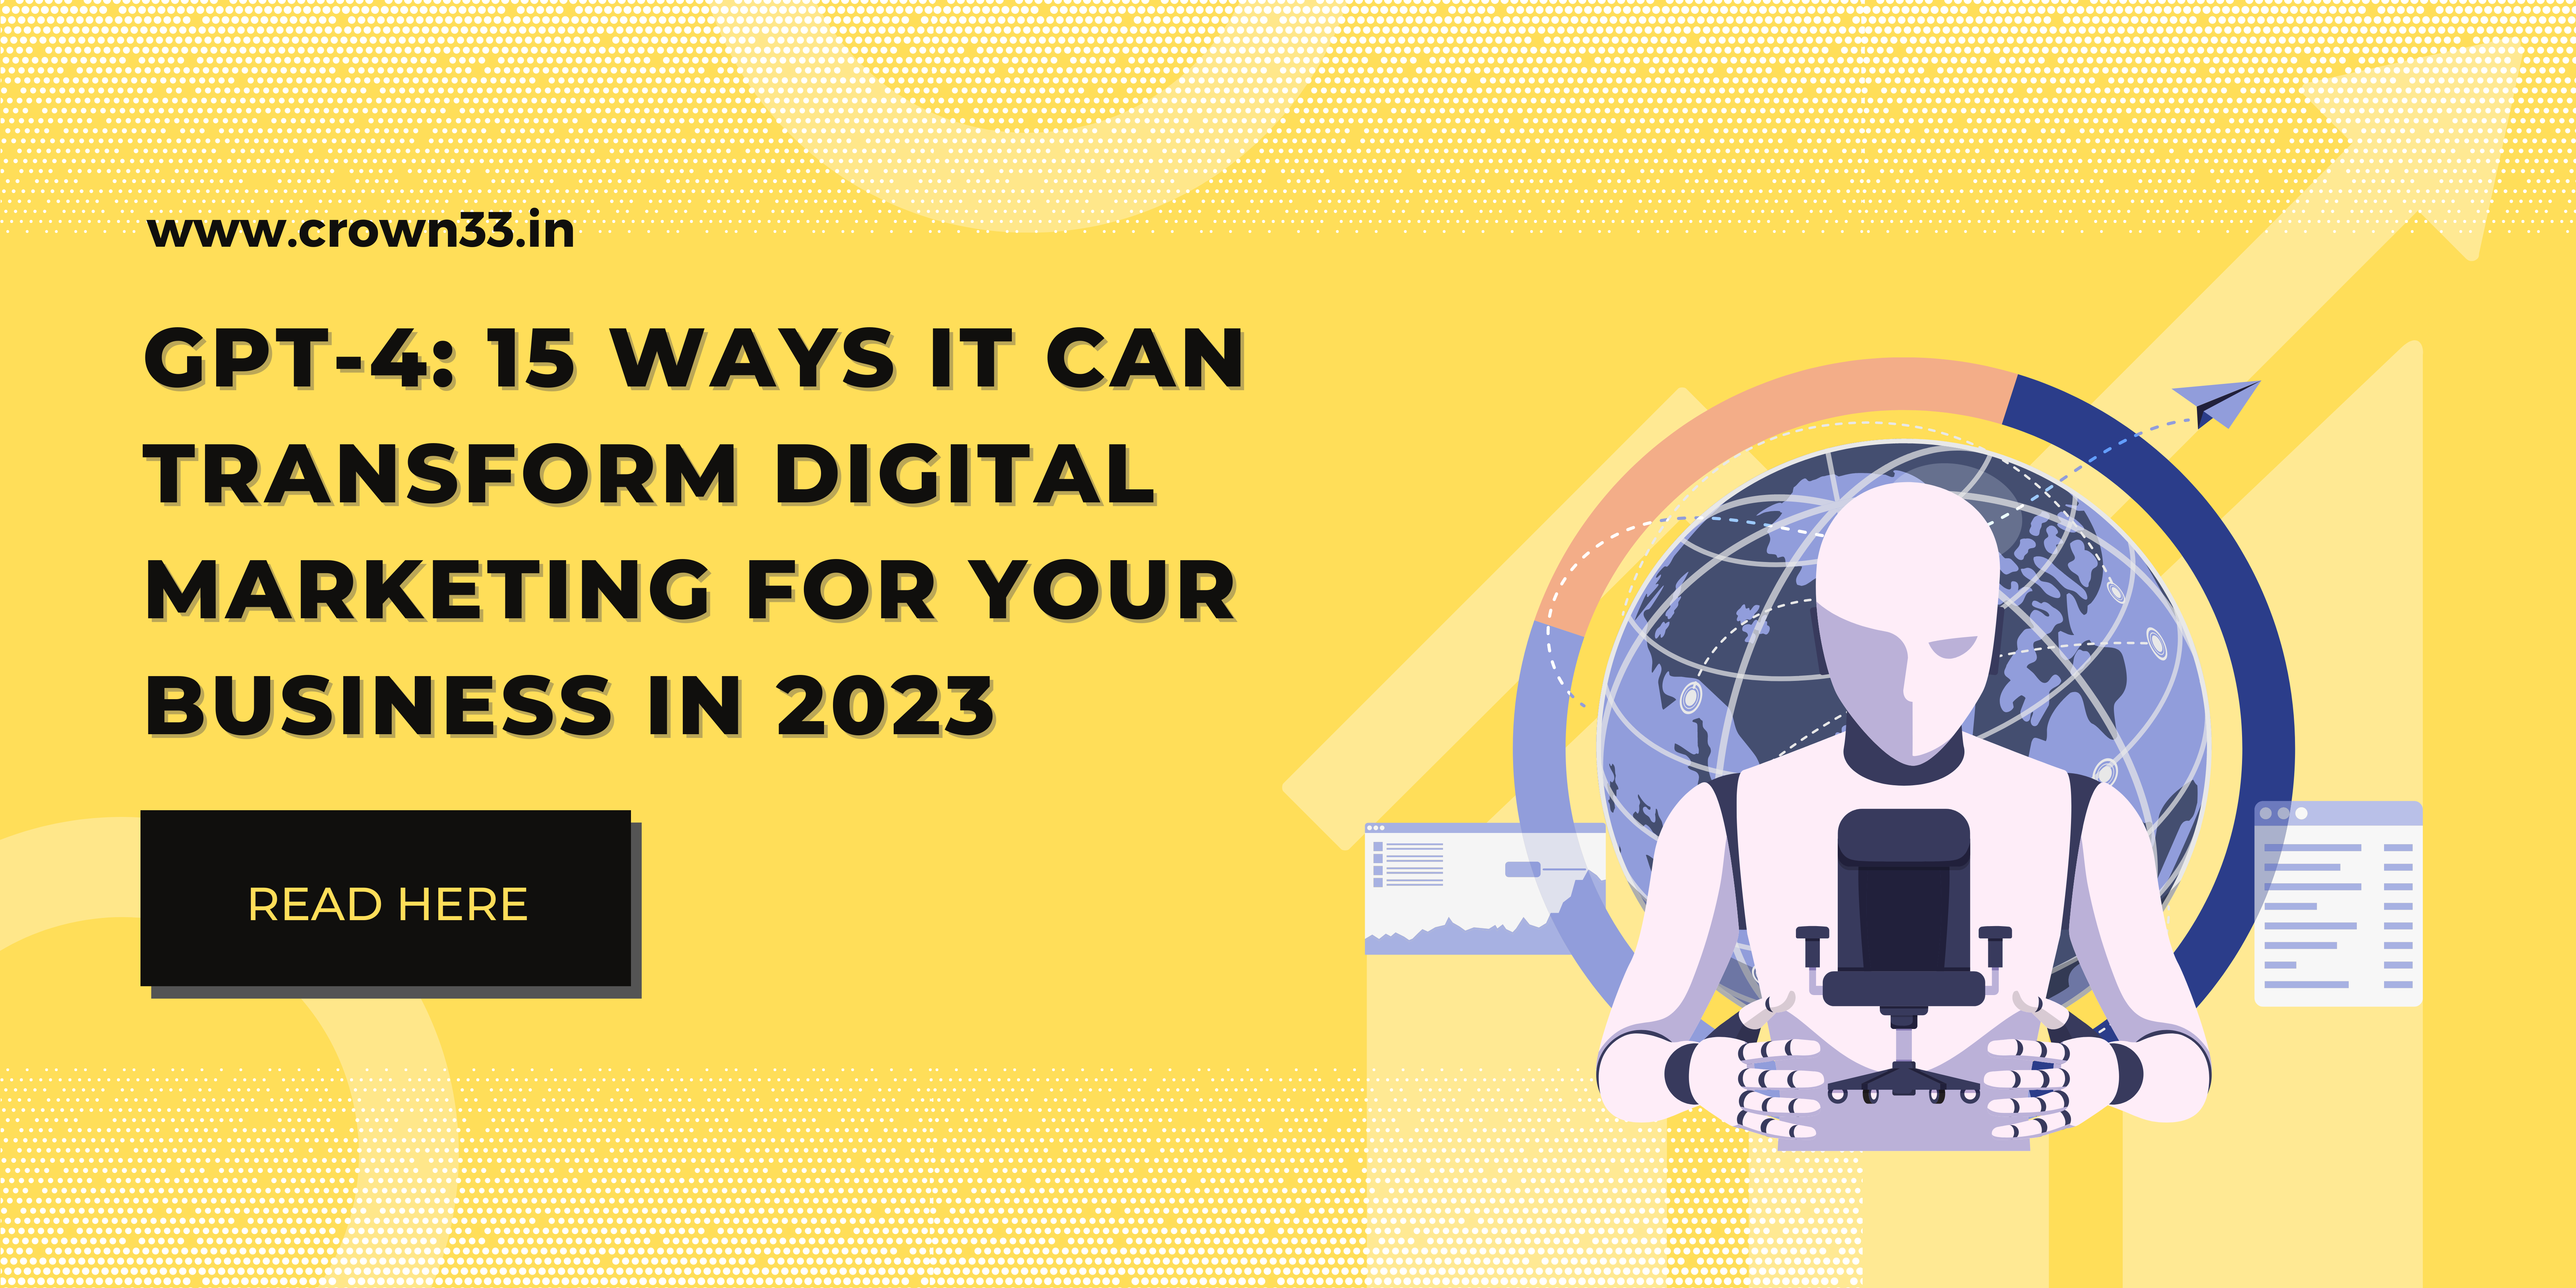 GPT-4: 15 Ways It Can Transform Digital Marketing for Your Business in 2023